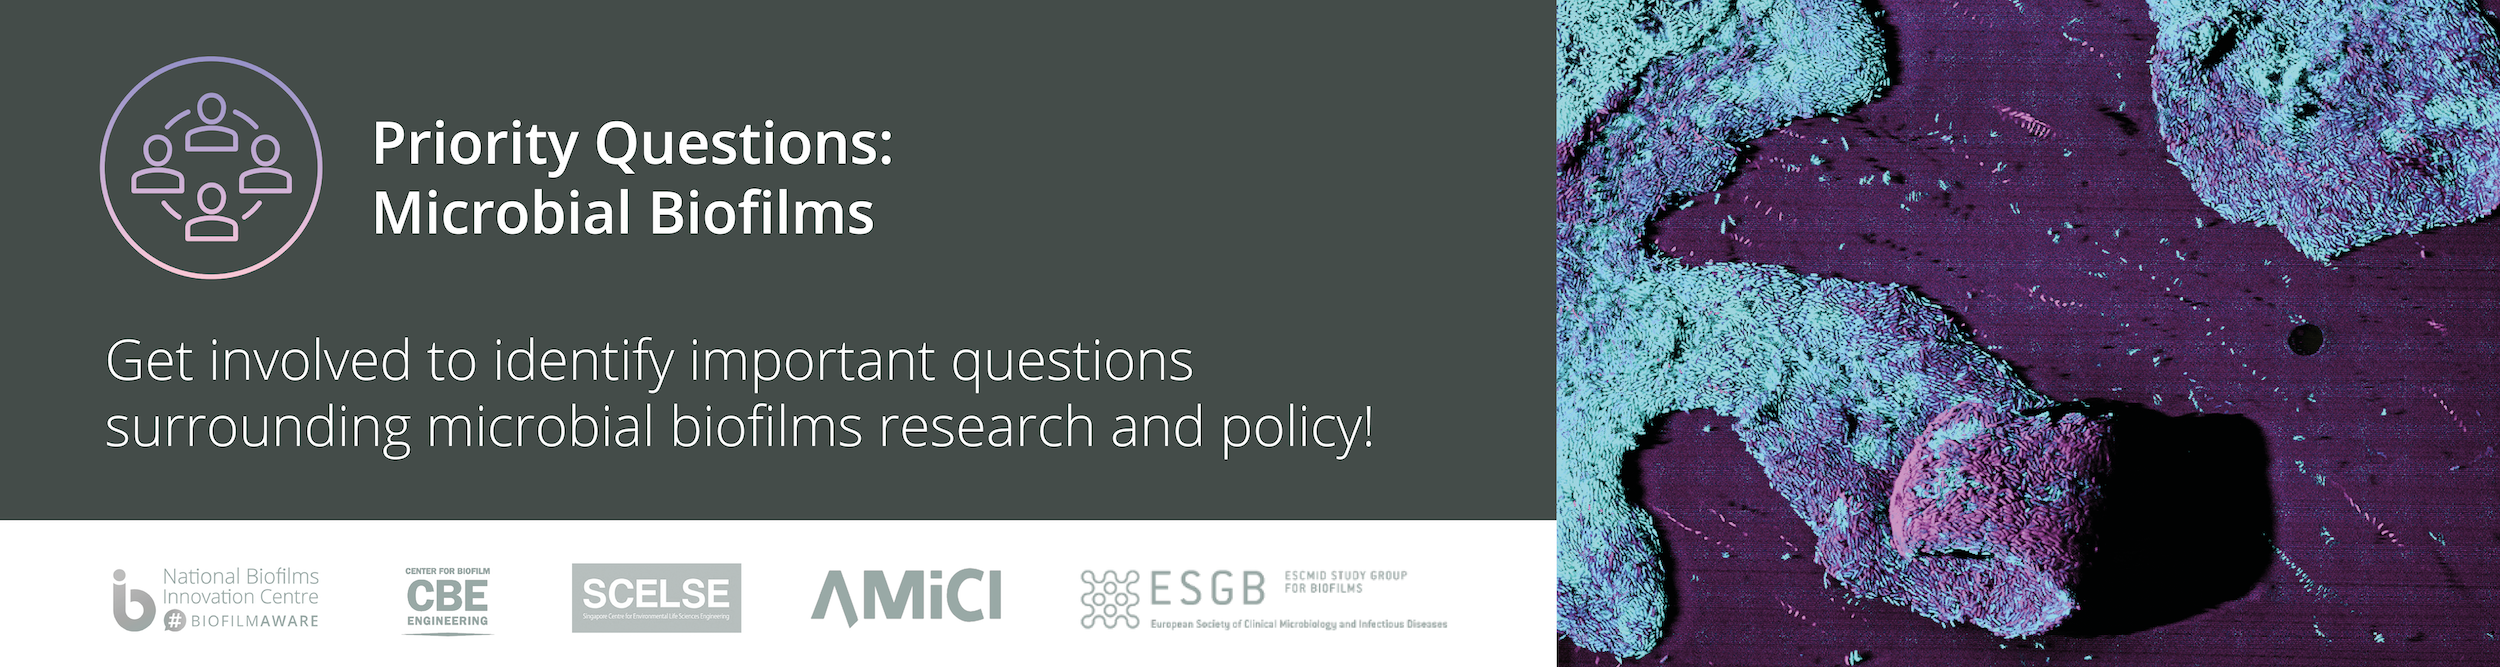 banner with image of e coli and text saying biofilm priority questions